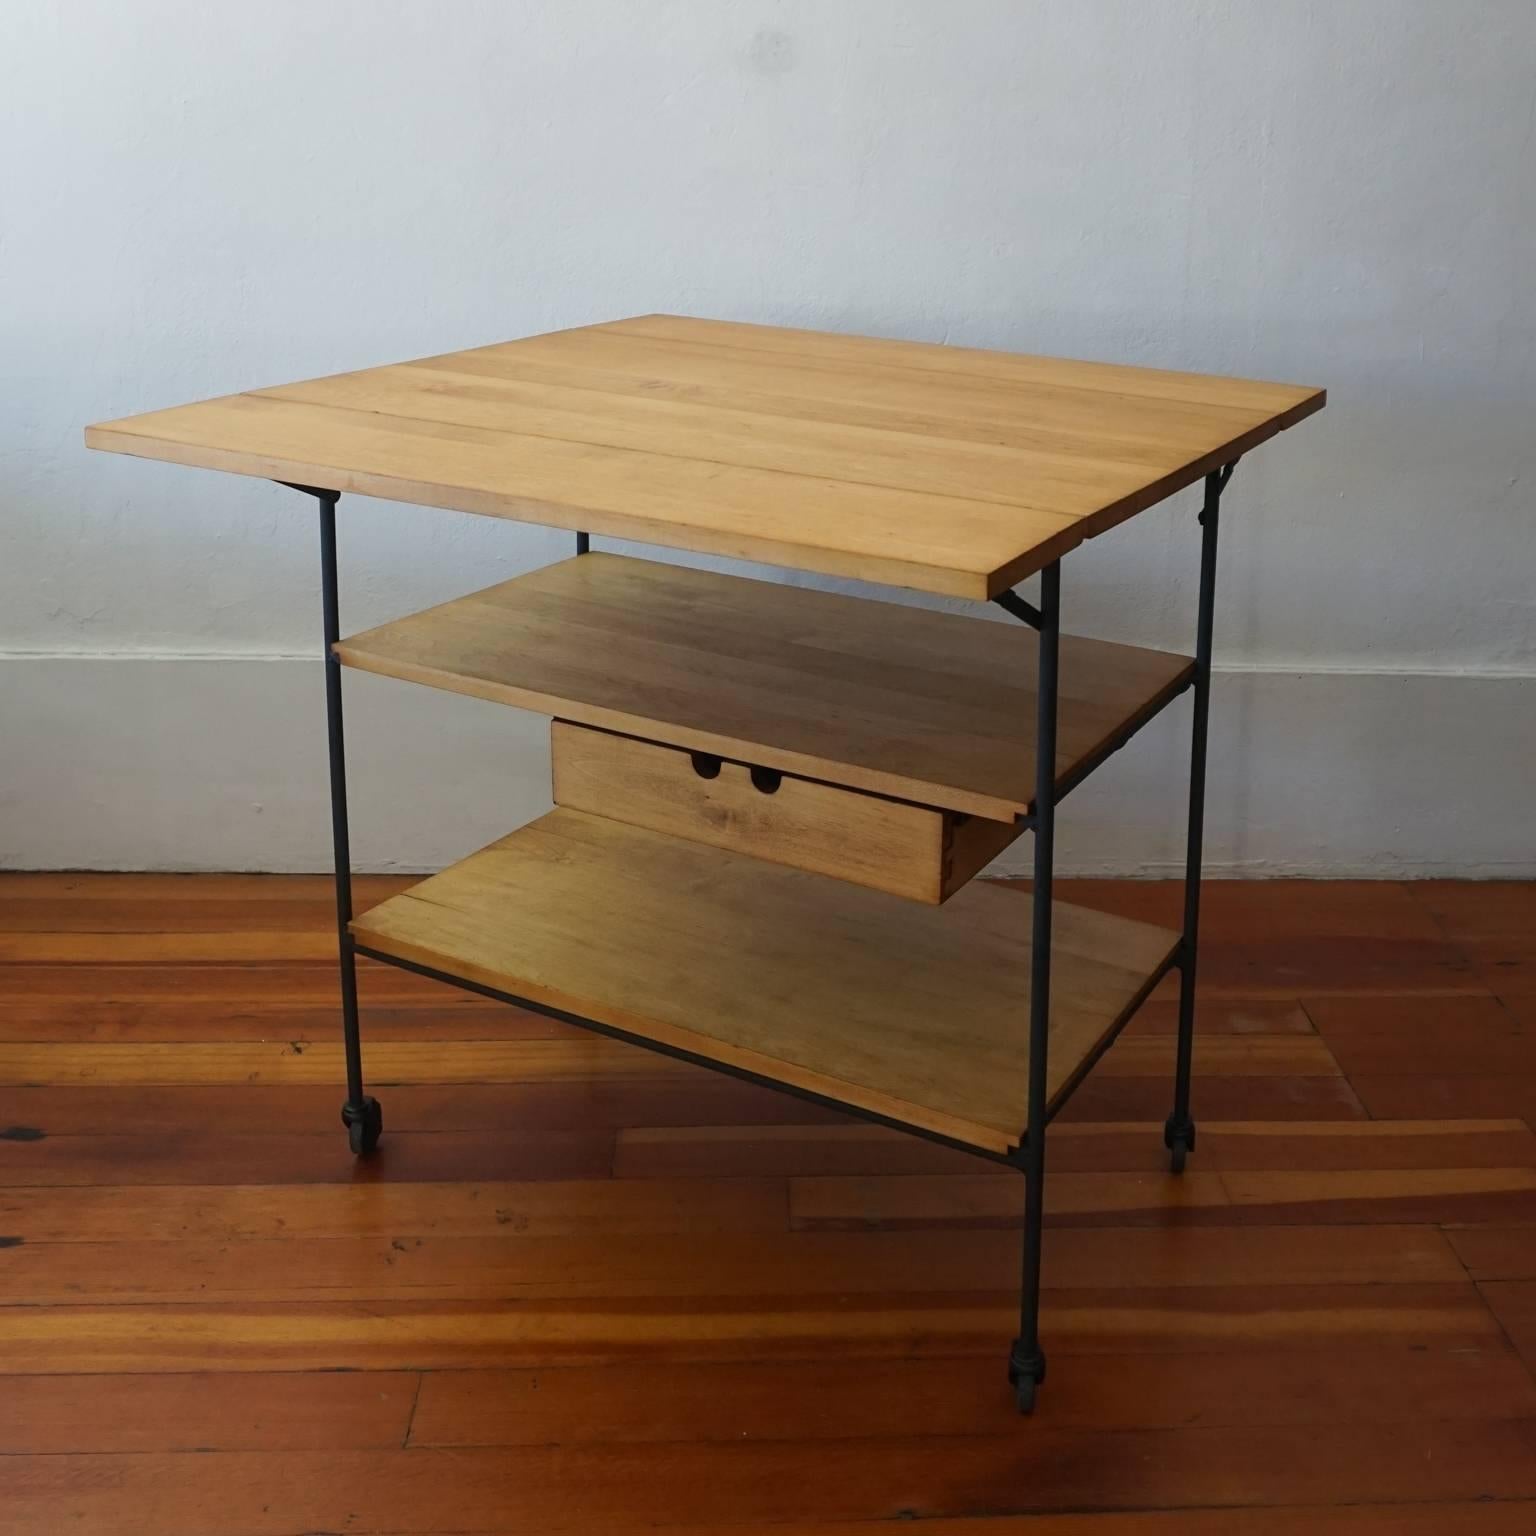 1950s Planner Group bar or serving cart with folding top and drawer. Iron and maple. Designed by Paul McCobb for Winchendon Furniture Company.